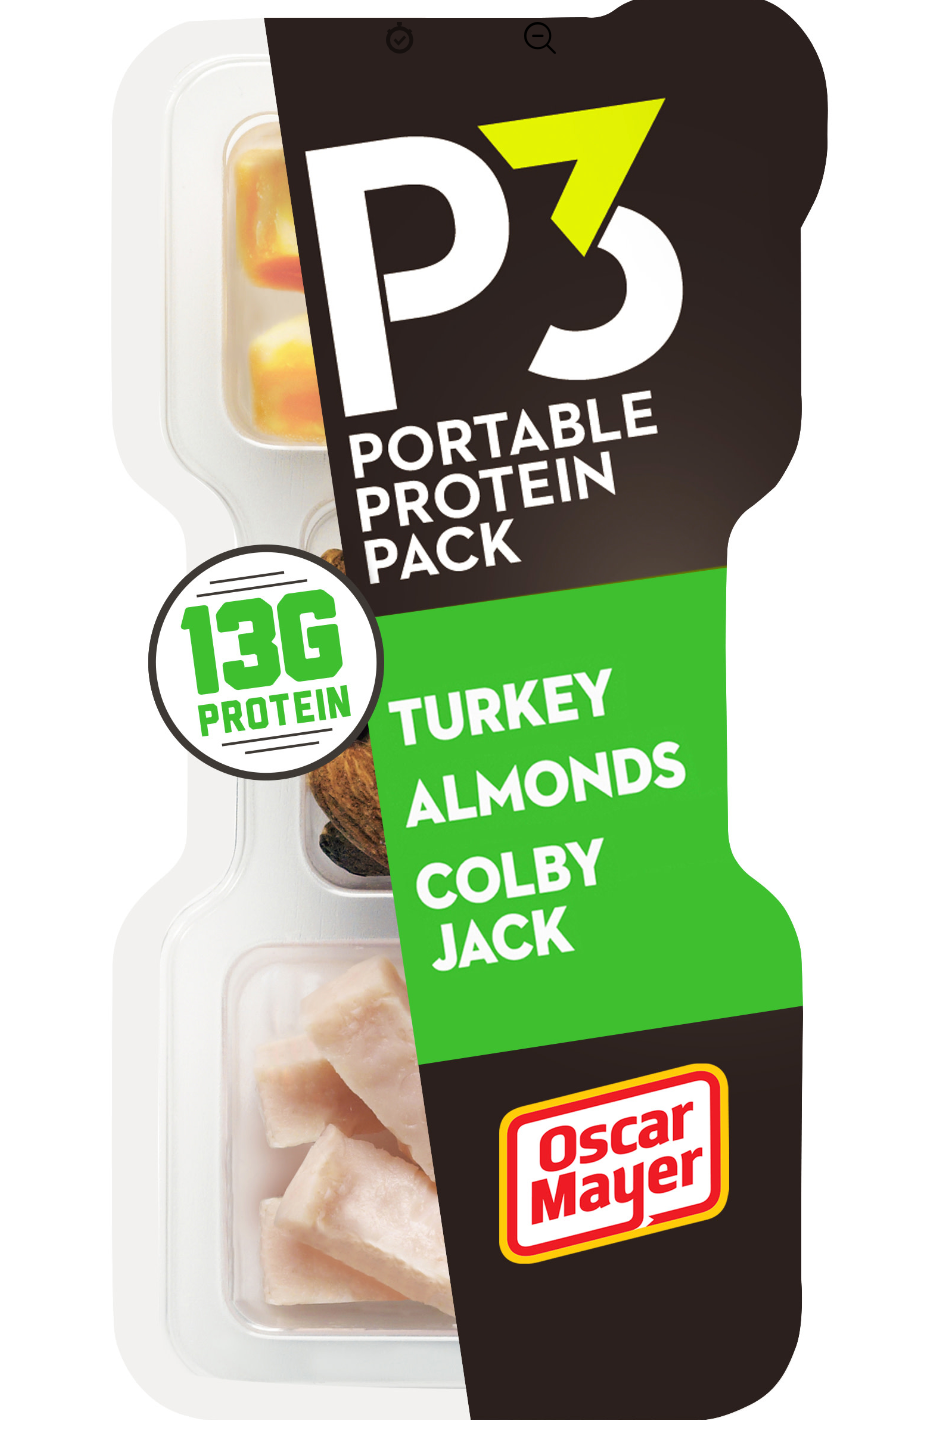 P3 Protein Pack - Turkey, Almonds & Colby Jack - 10pk